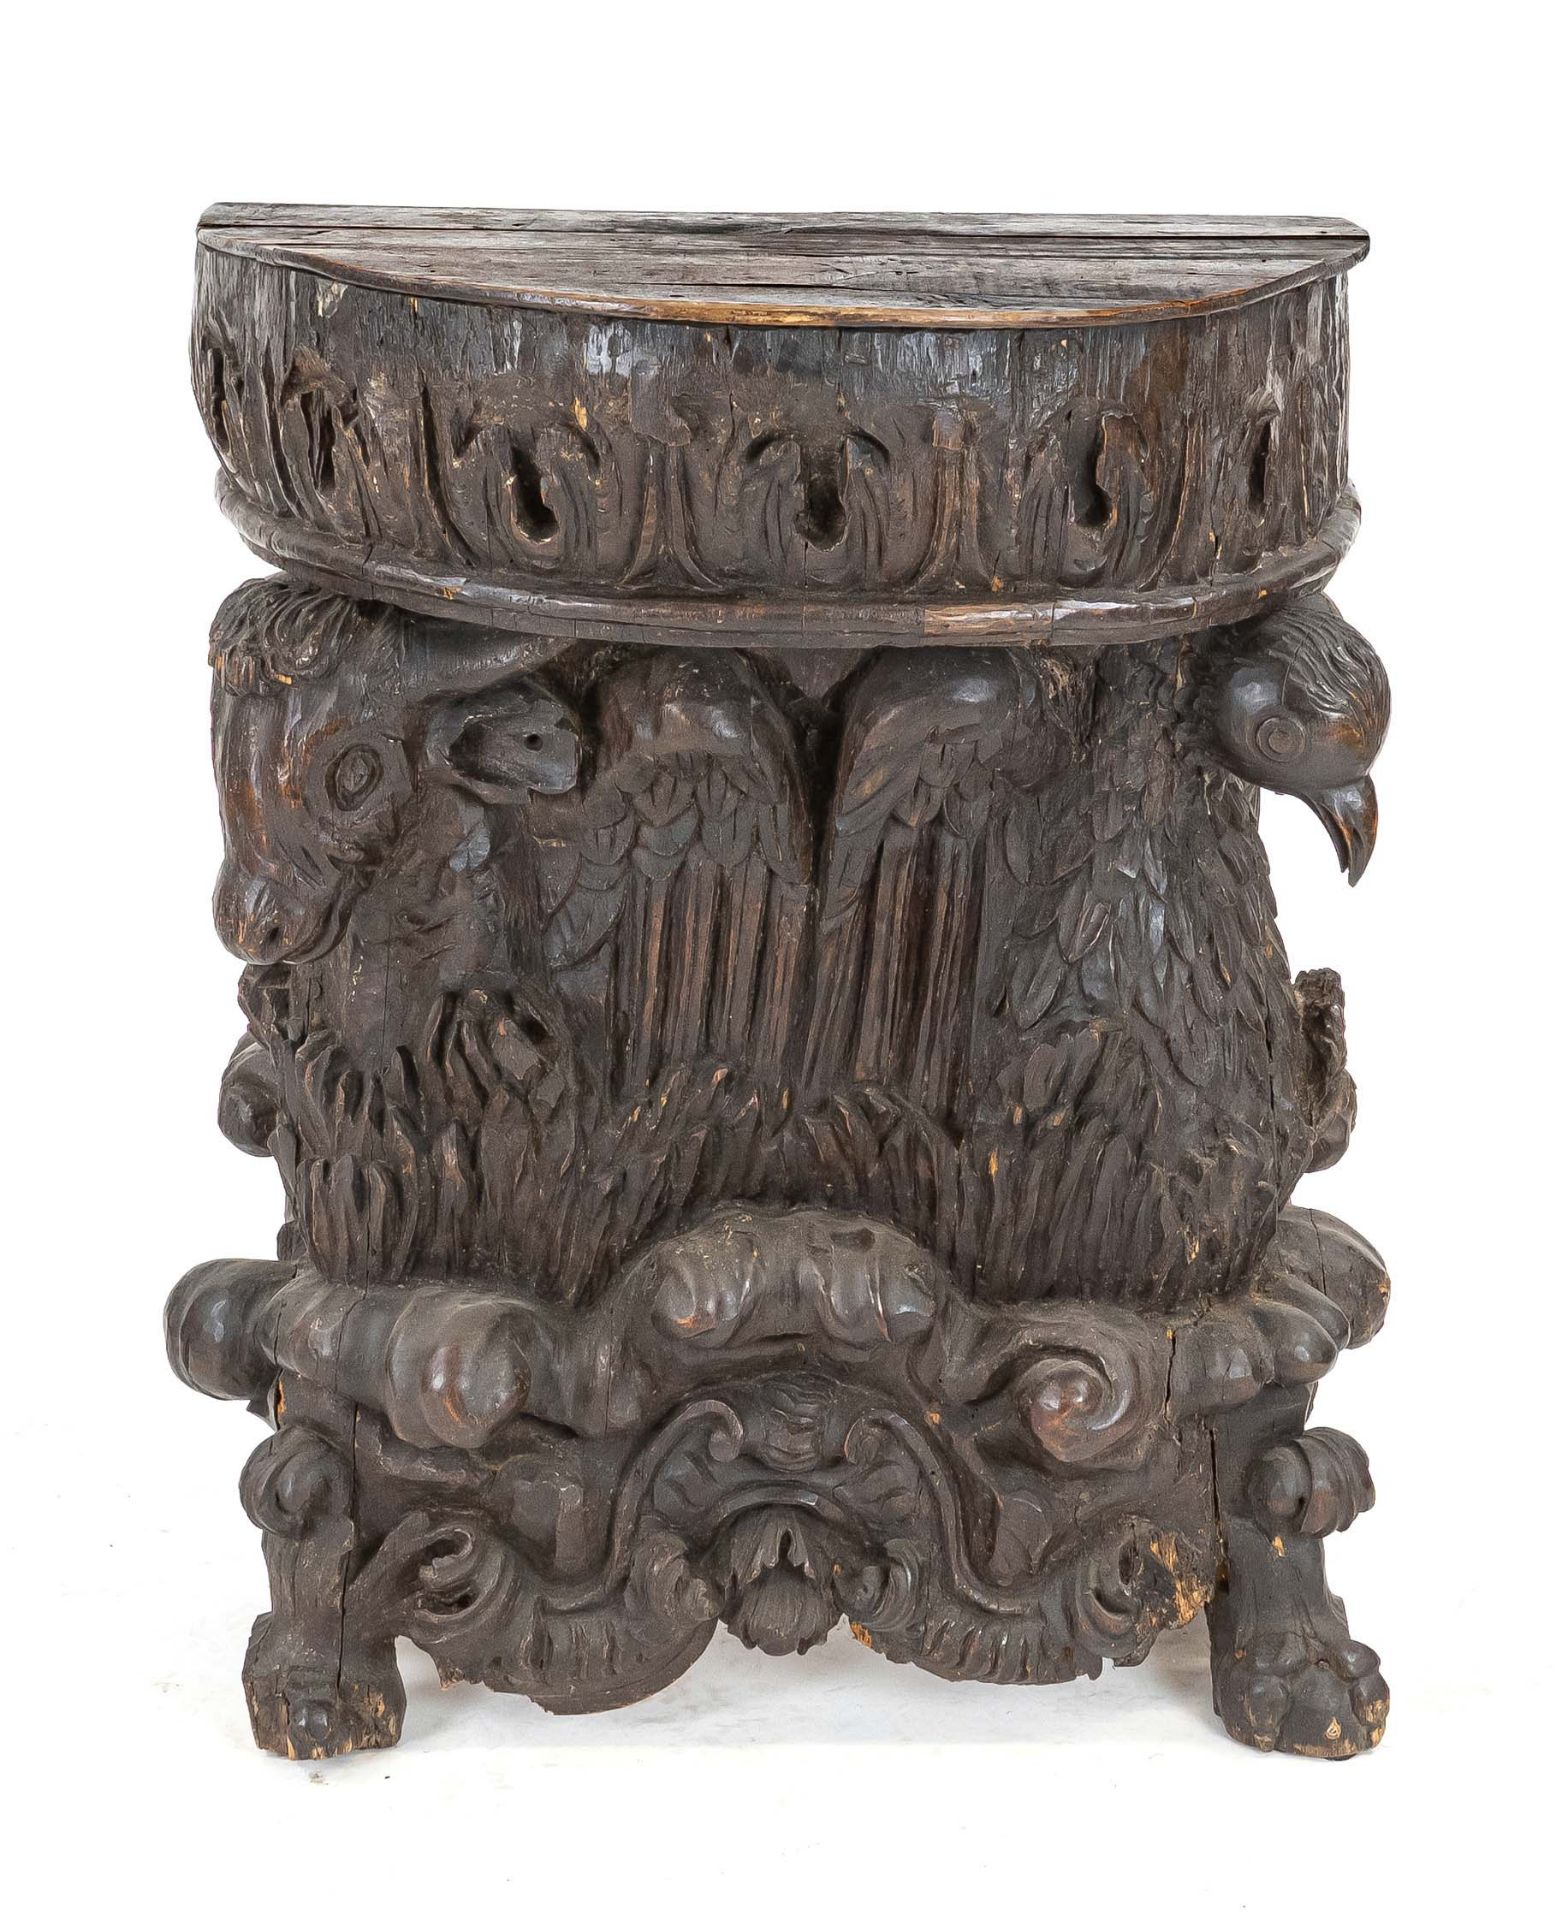 Console table/decorative object, probably 18th century, carved wood, depiction of ox and bird,